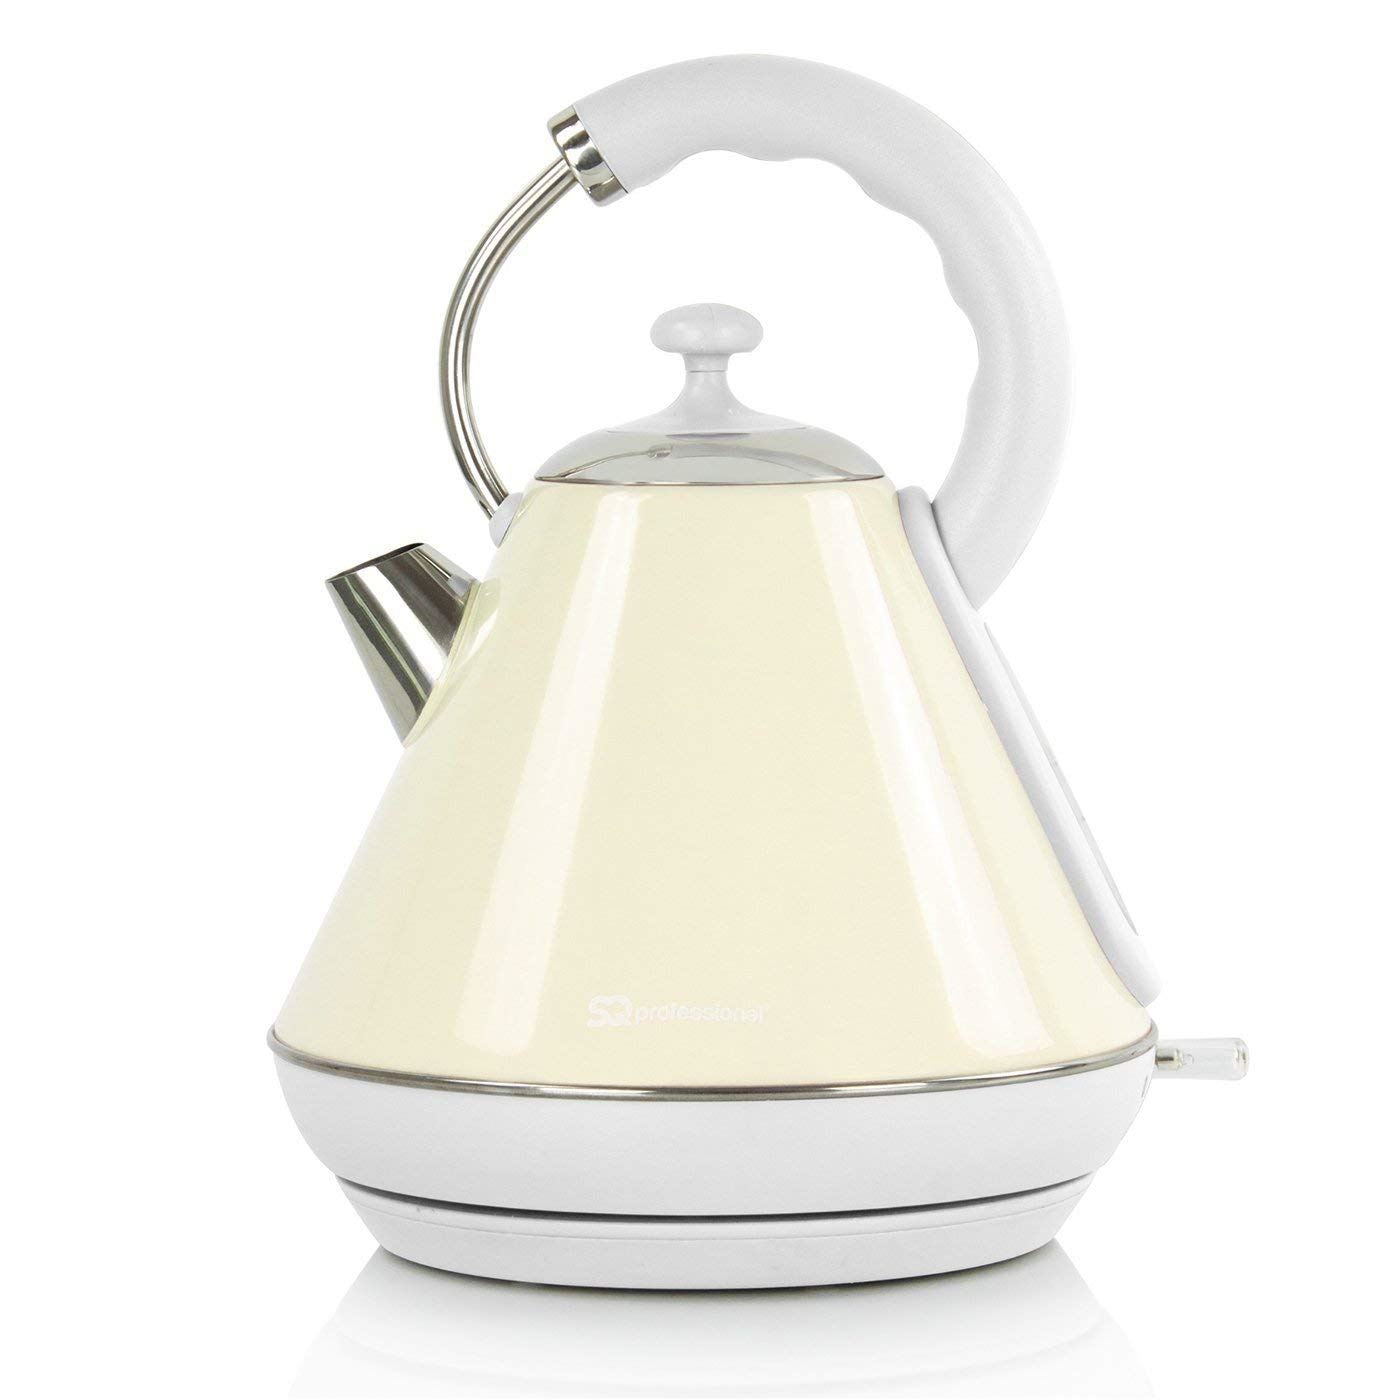 Legacy 1.8L Stainless Steel Electric Kettle Rapid Boil, Energy-Efficient 2200W